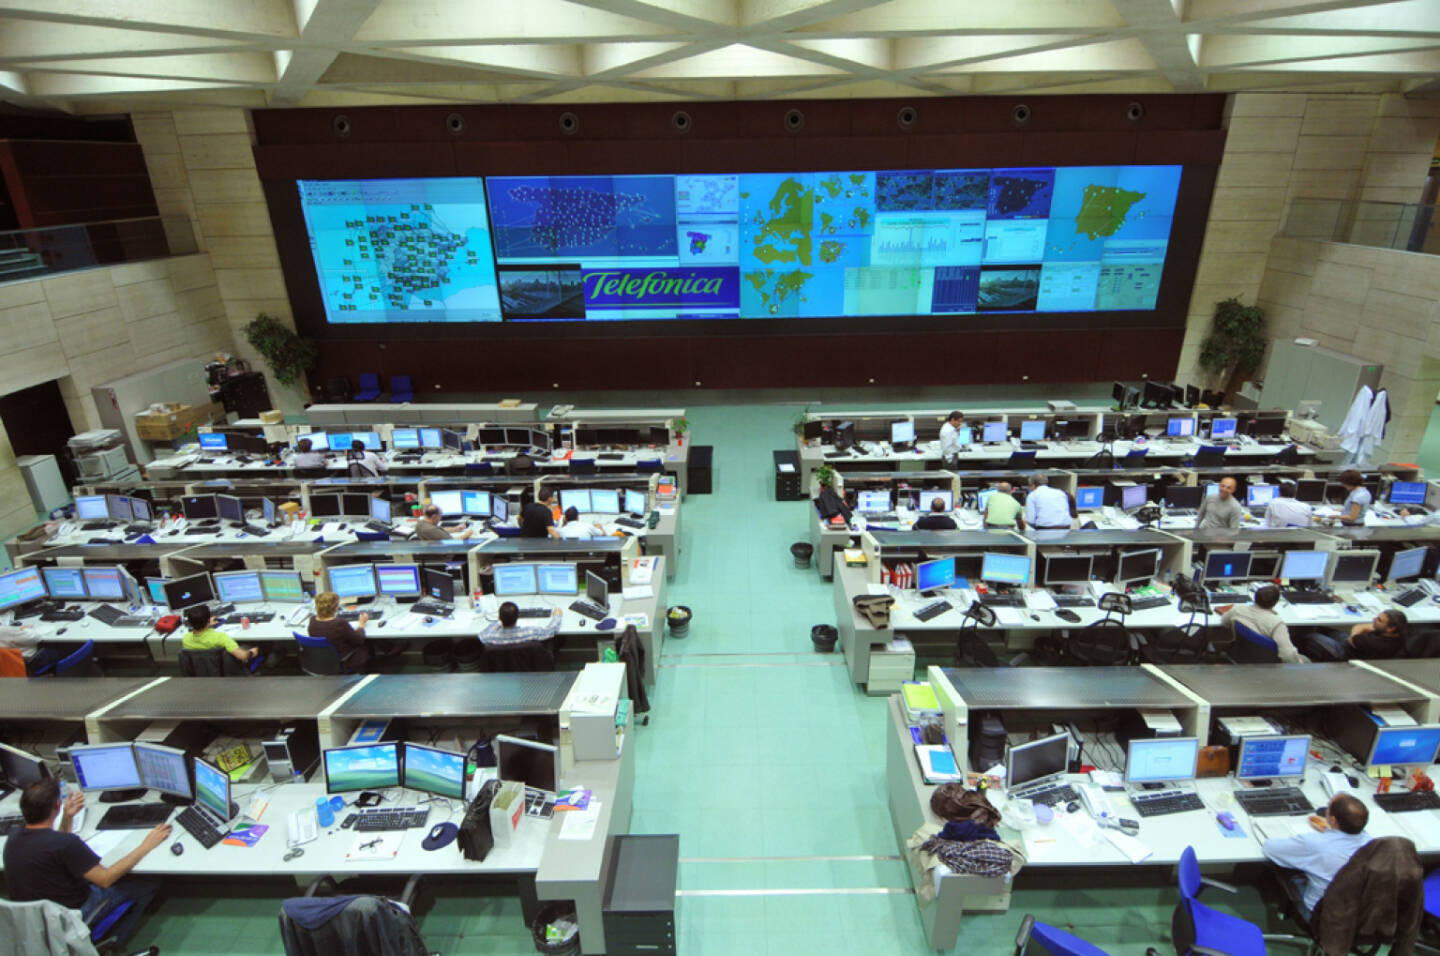 The CNSO (National Centre for Supervision and Operations) control room, Telefonica